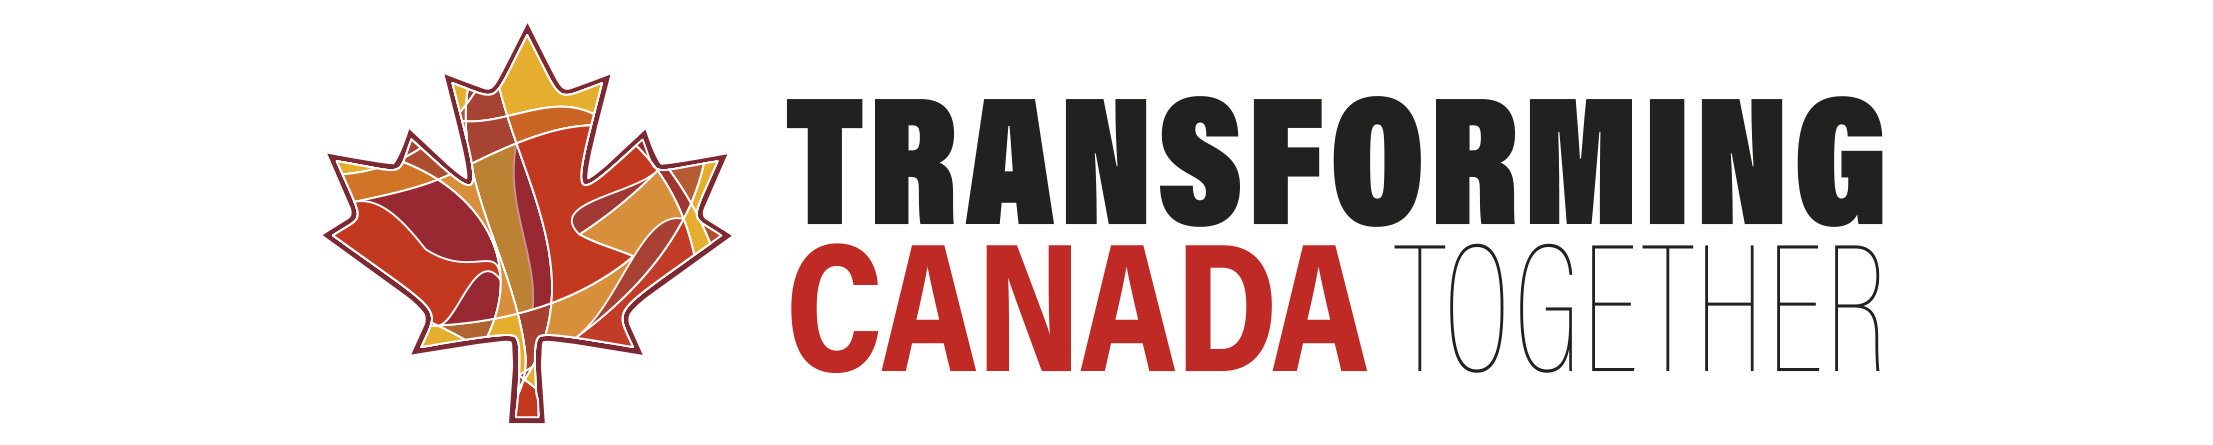 Transforming Canada Together Banner